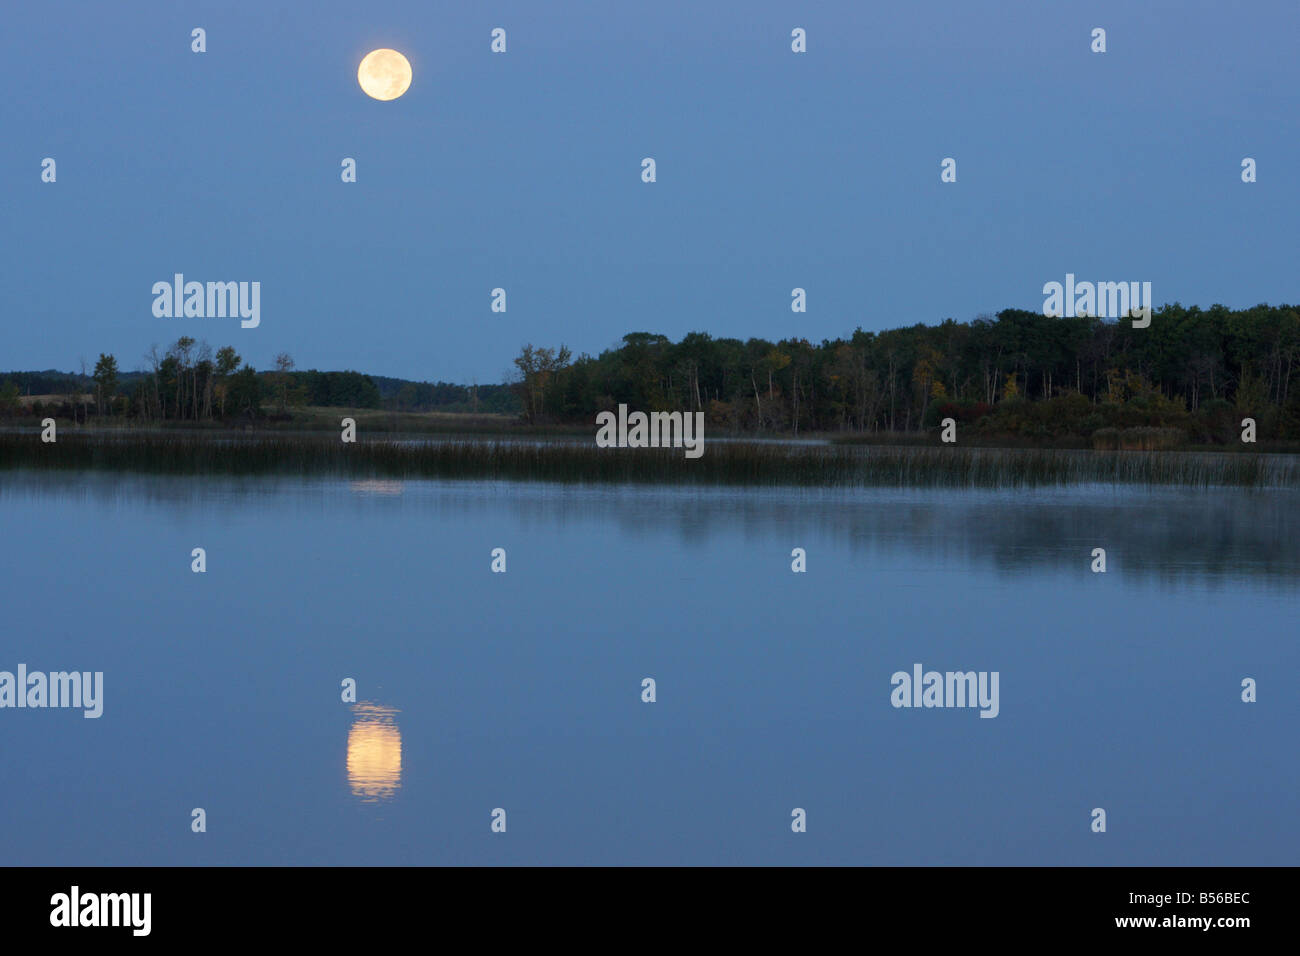 Early dawn moonscape with reflection of the moon in the water Stock Photo